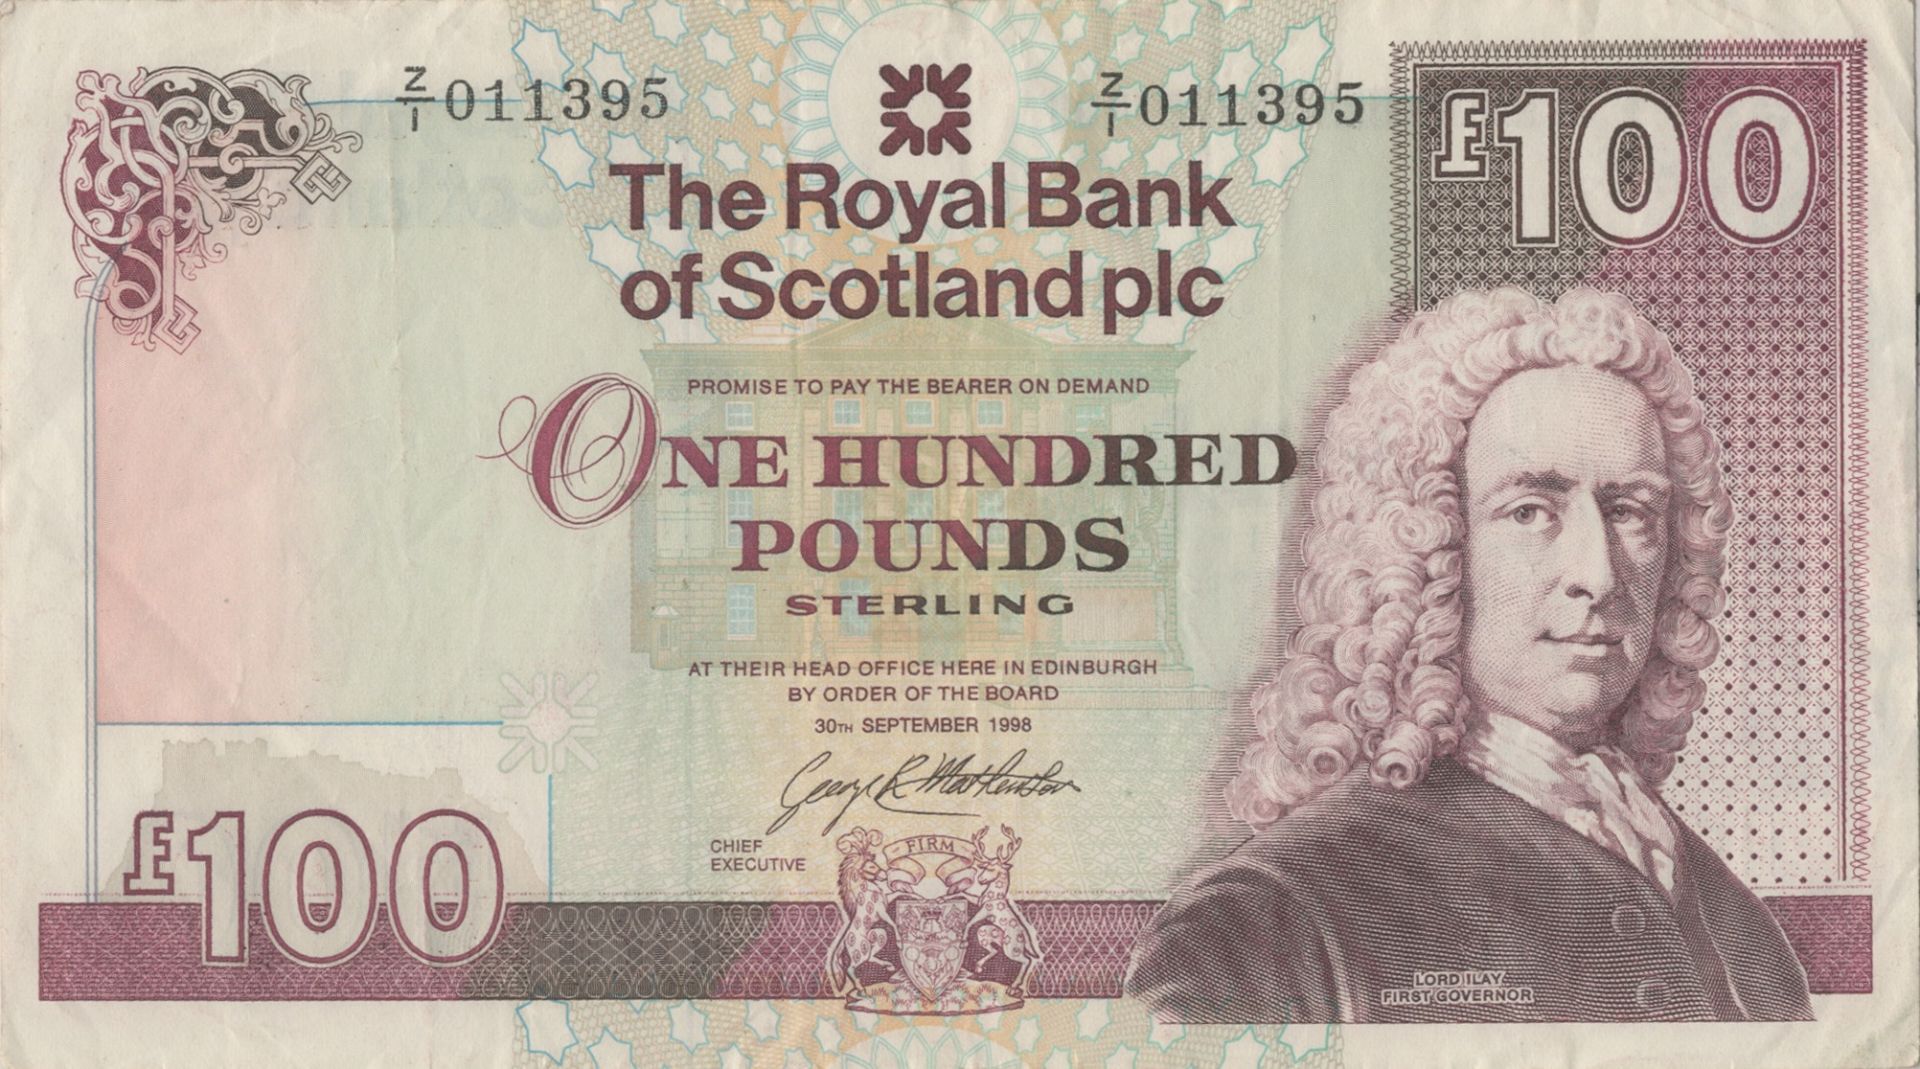 The Royal Bank of Scotland Limited,